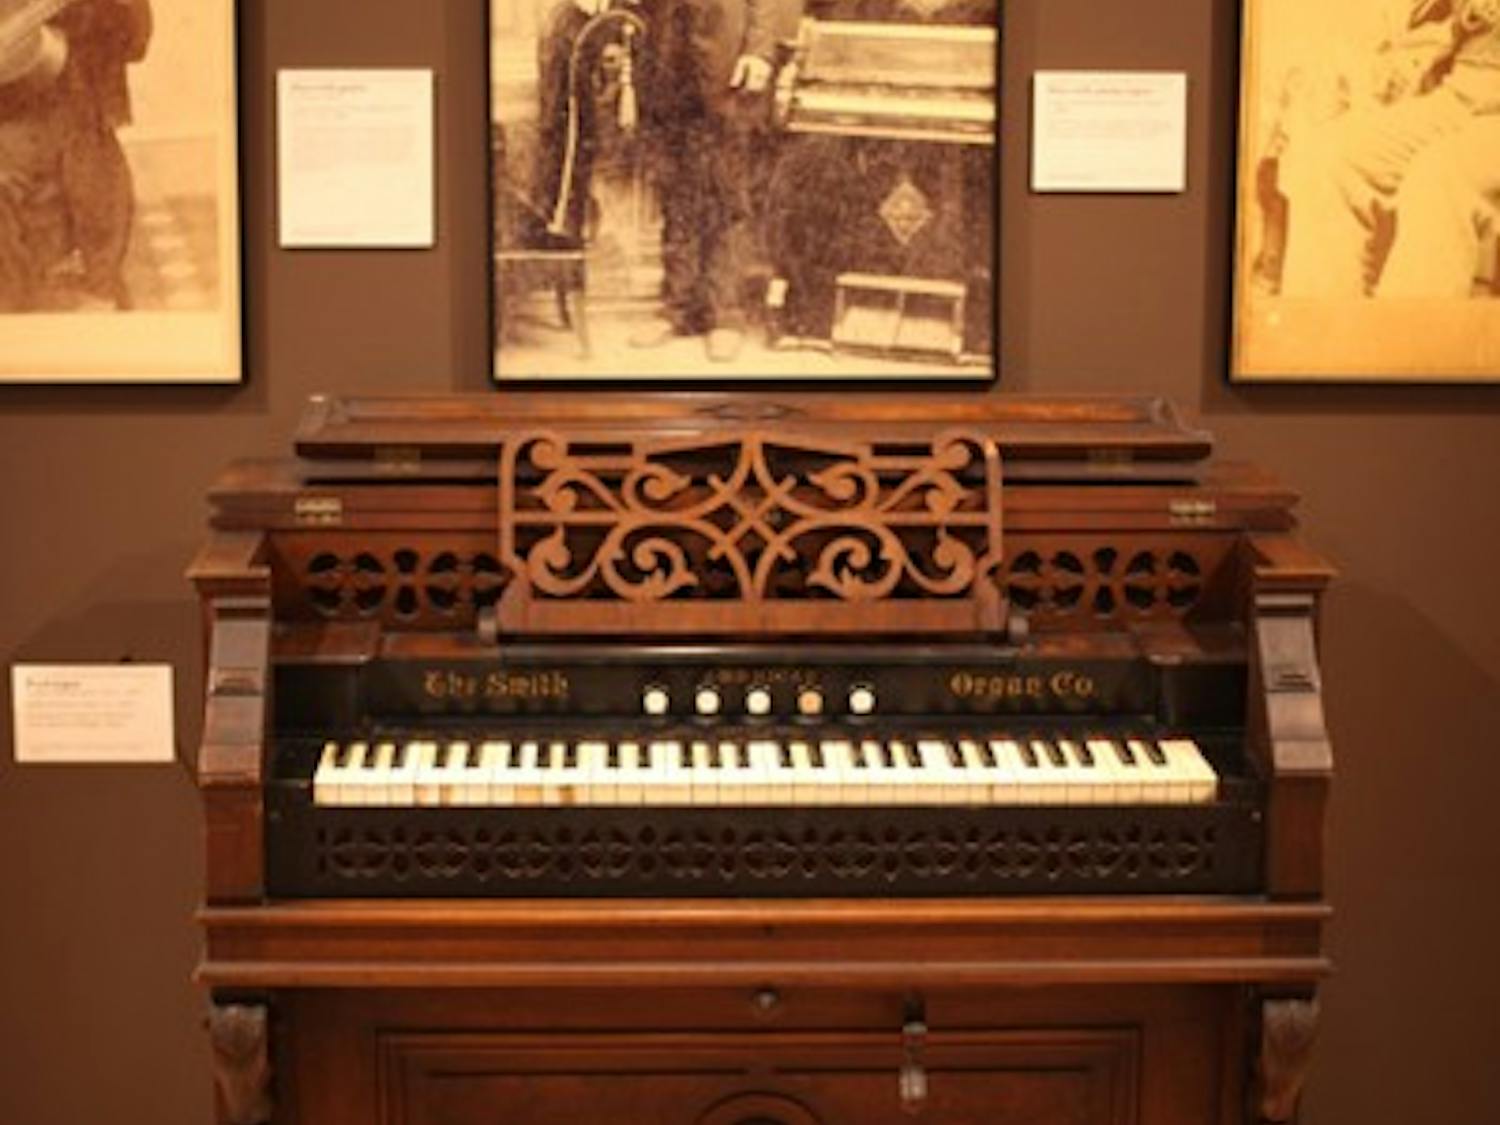 Courtesy of the Musical Instrument Museum